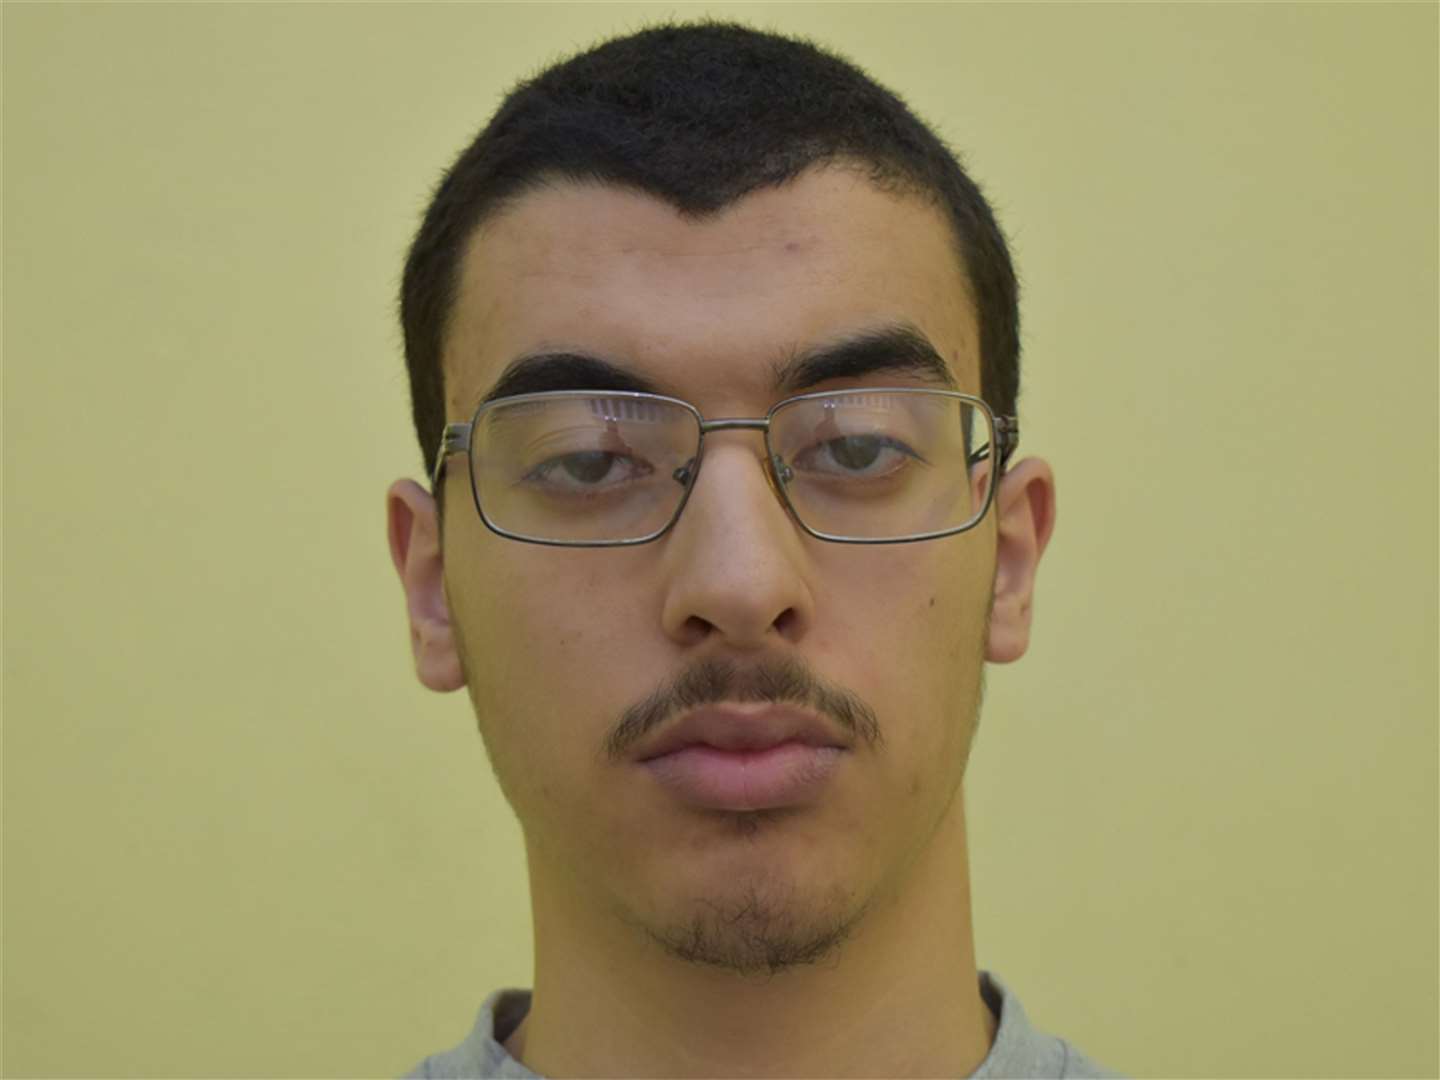 Hashem Abedi, the younger brother of Manchester Arena bomber Salman Abedi, was convicted of 22 counts of murder (Greater Manchester Police/PA)